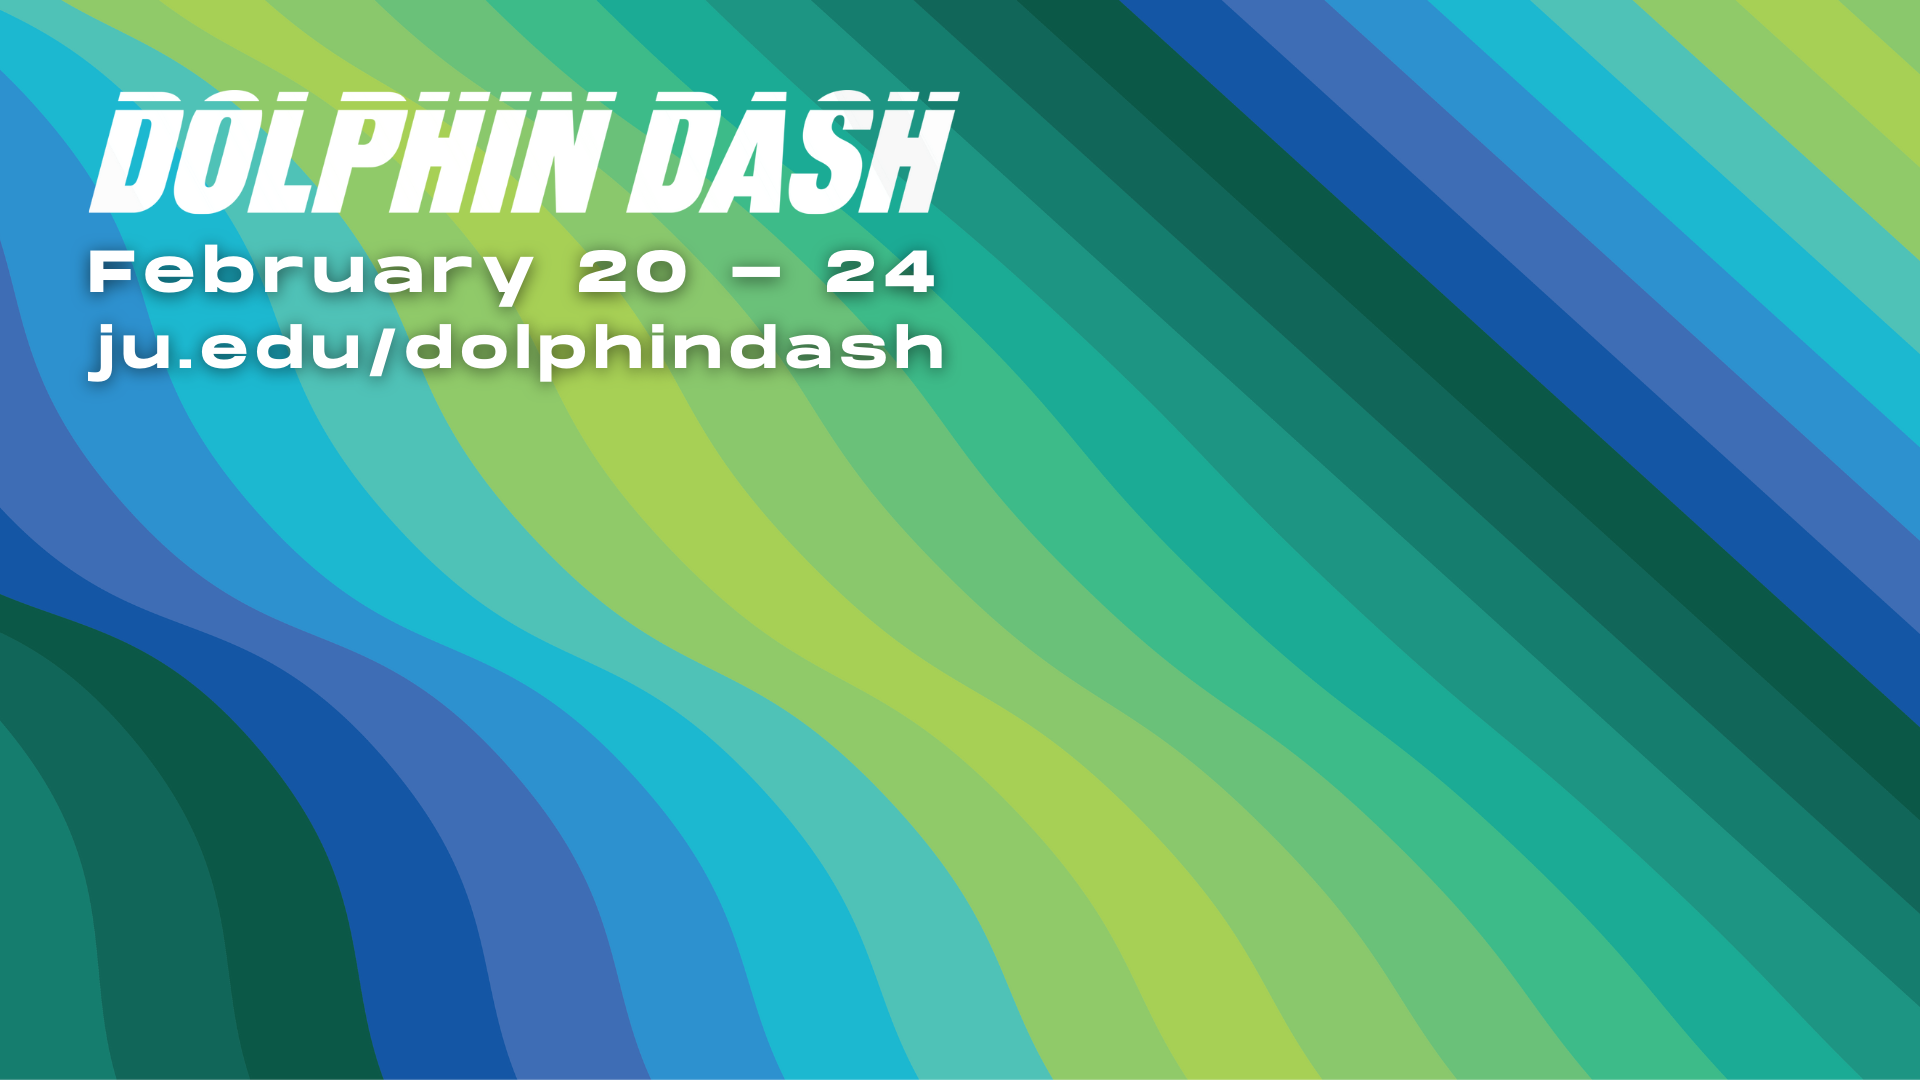 A virtual background showing the Dolphin Dash logo and the dates for 2023.